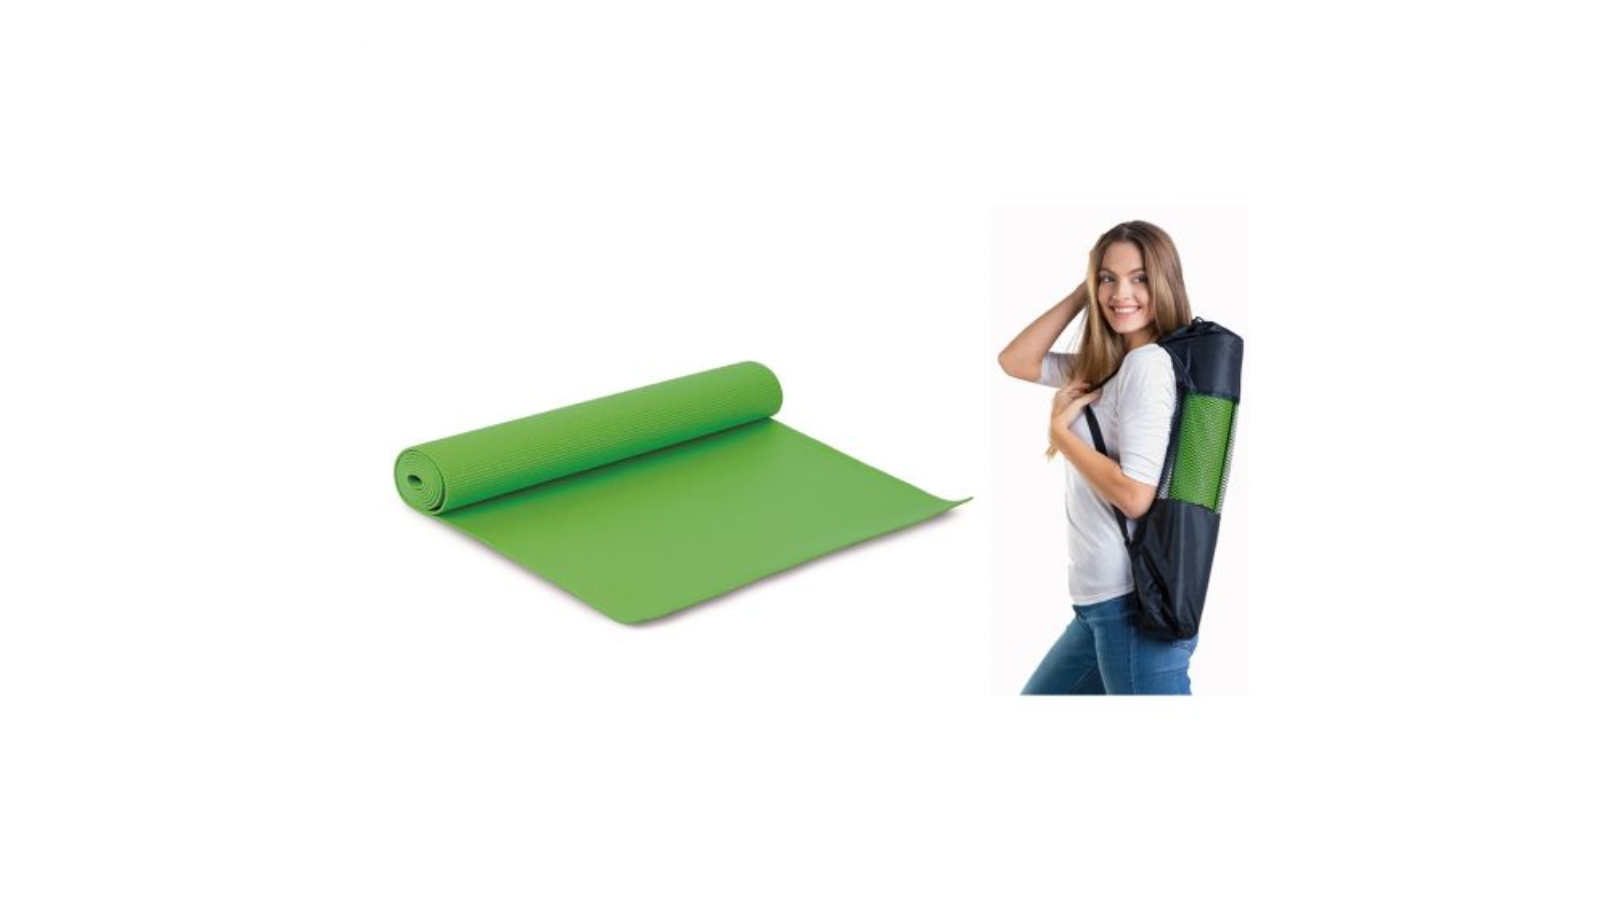 <p>The yoga mat with a convenient carrying bag by Silicon</p>
